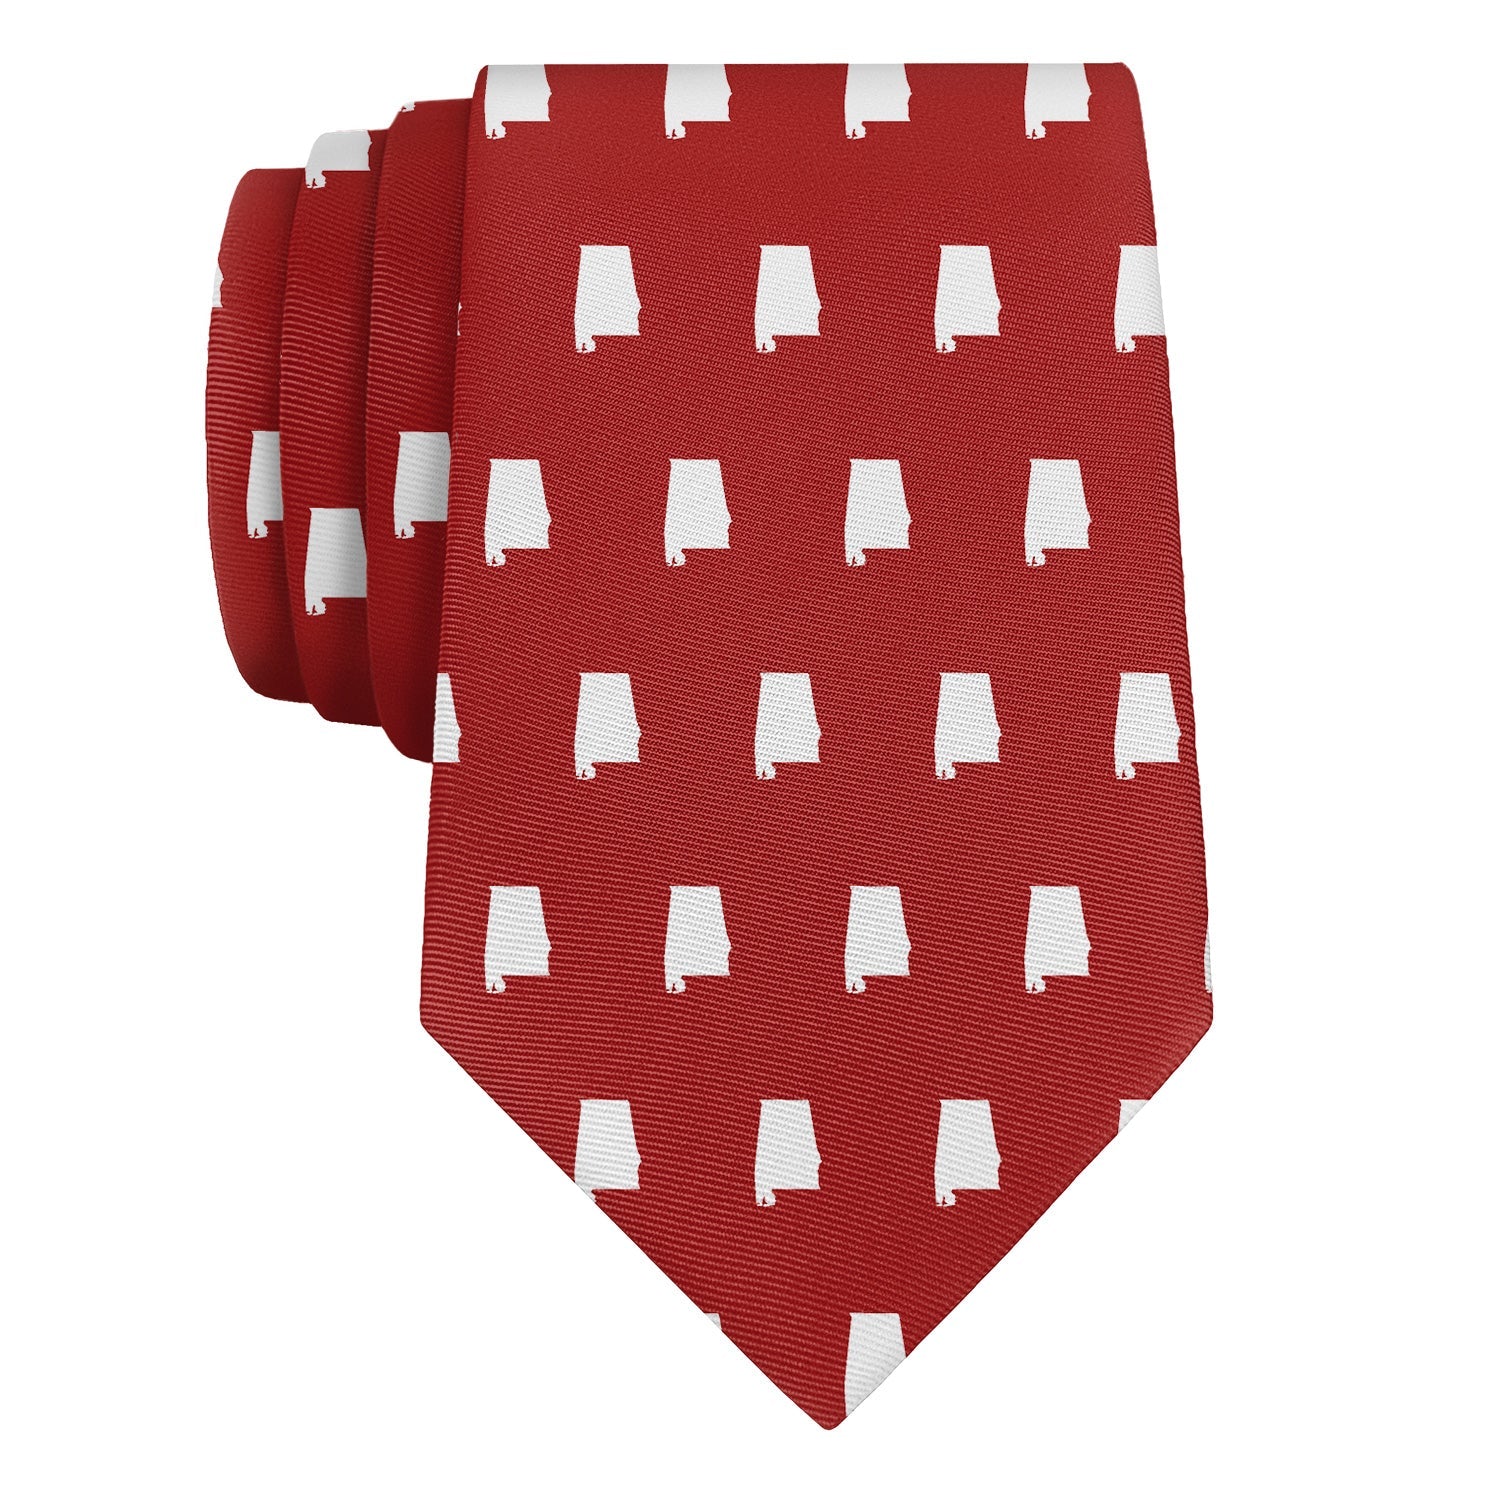 Alabama State Outline Necktie - Rolled - Knotty Tie Co.